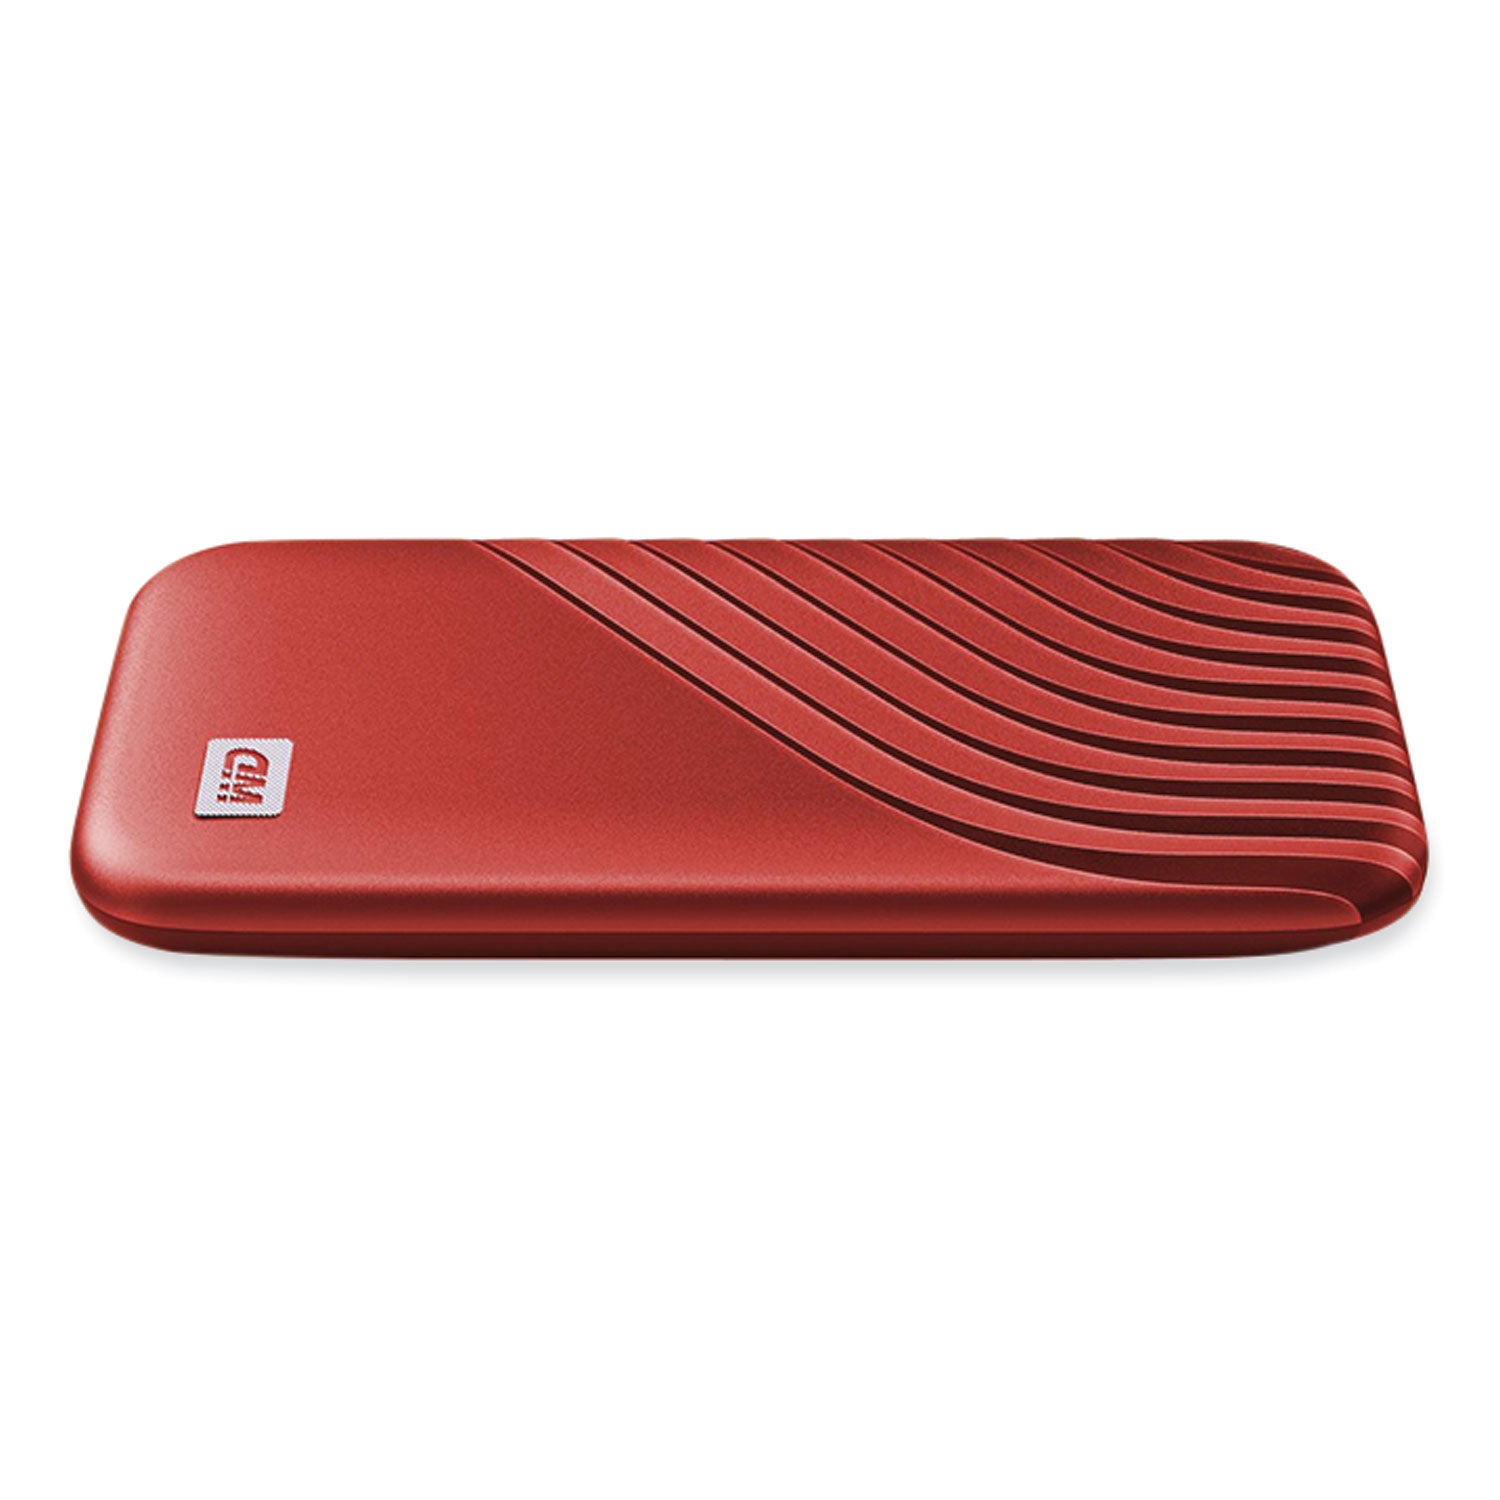 my-passport-external-solid-state-drive-1-tb-usb-32-red_wdcagf0010brd - 5